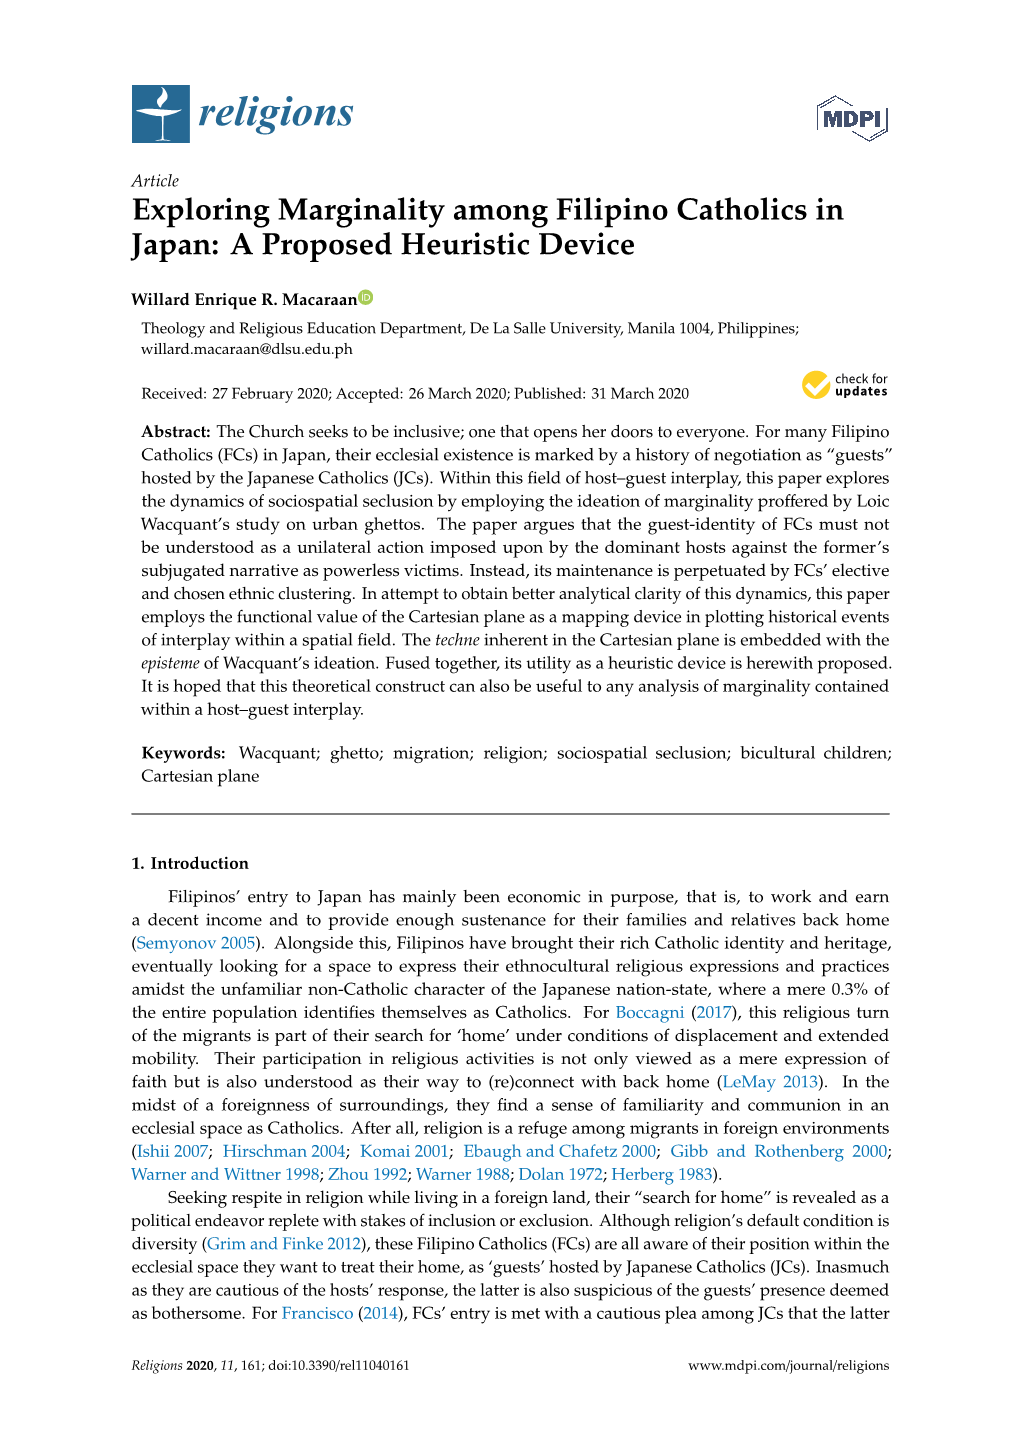 Exploring Marginality Among Filipino Catholics in Japan: a Proposed Heuristic Device